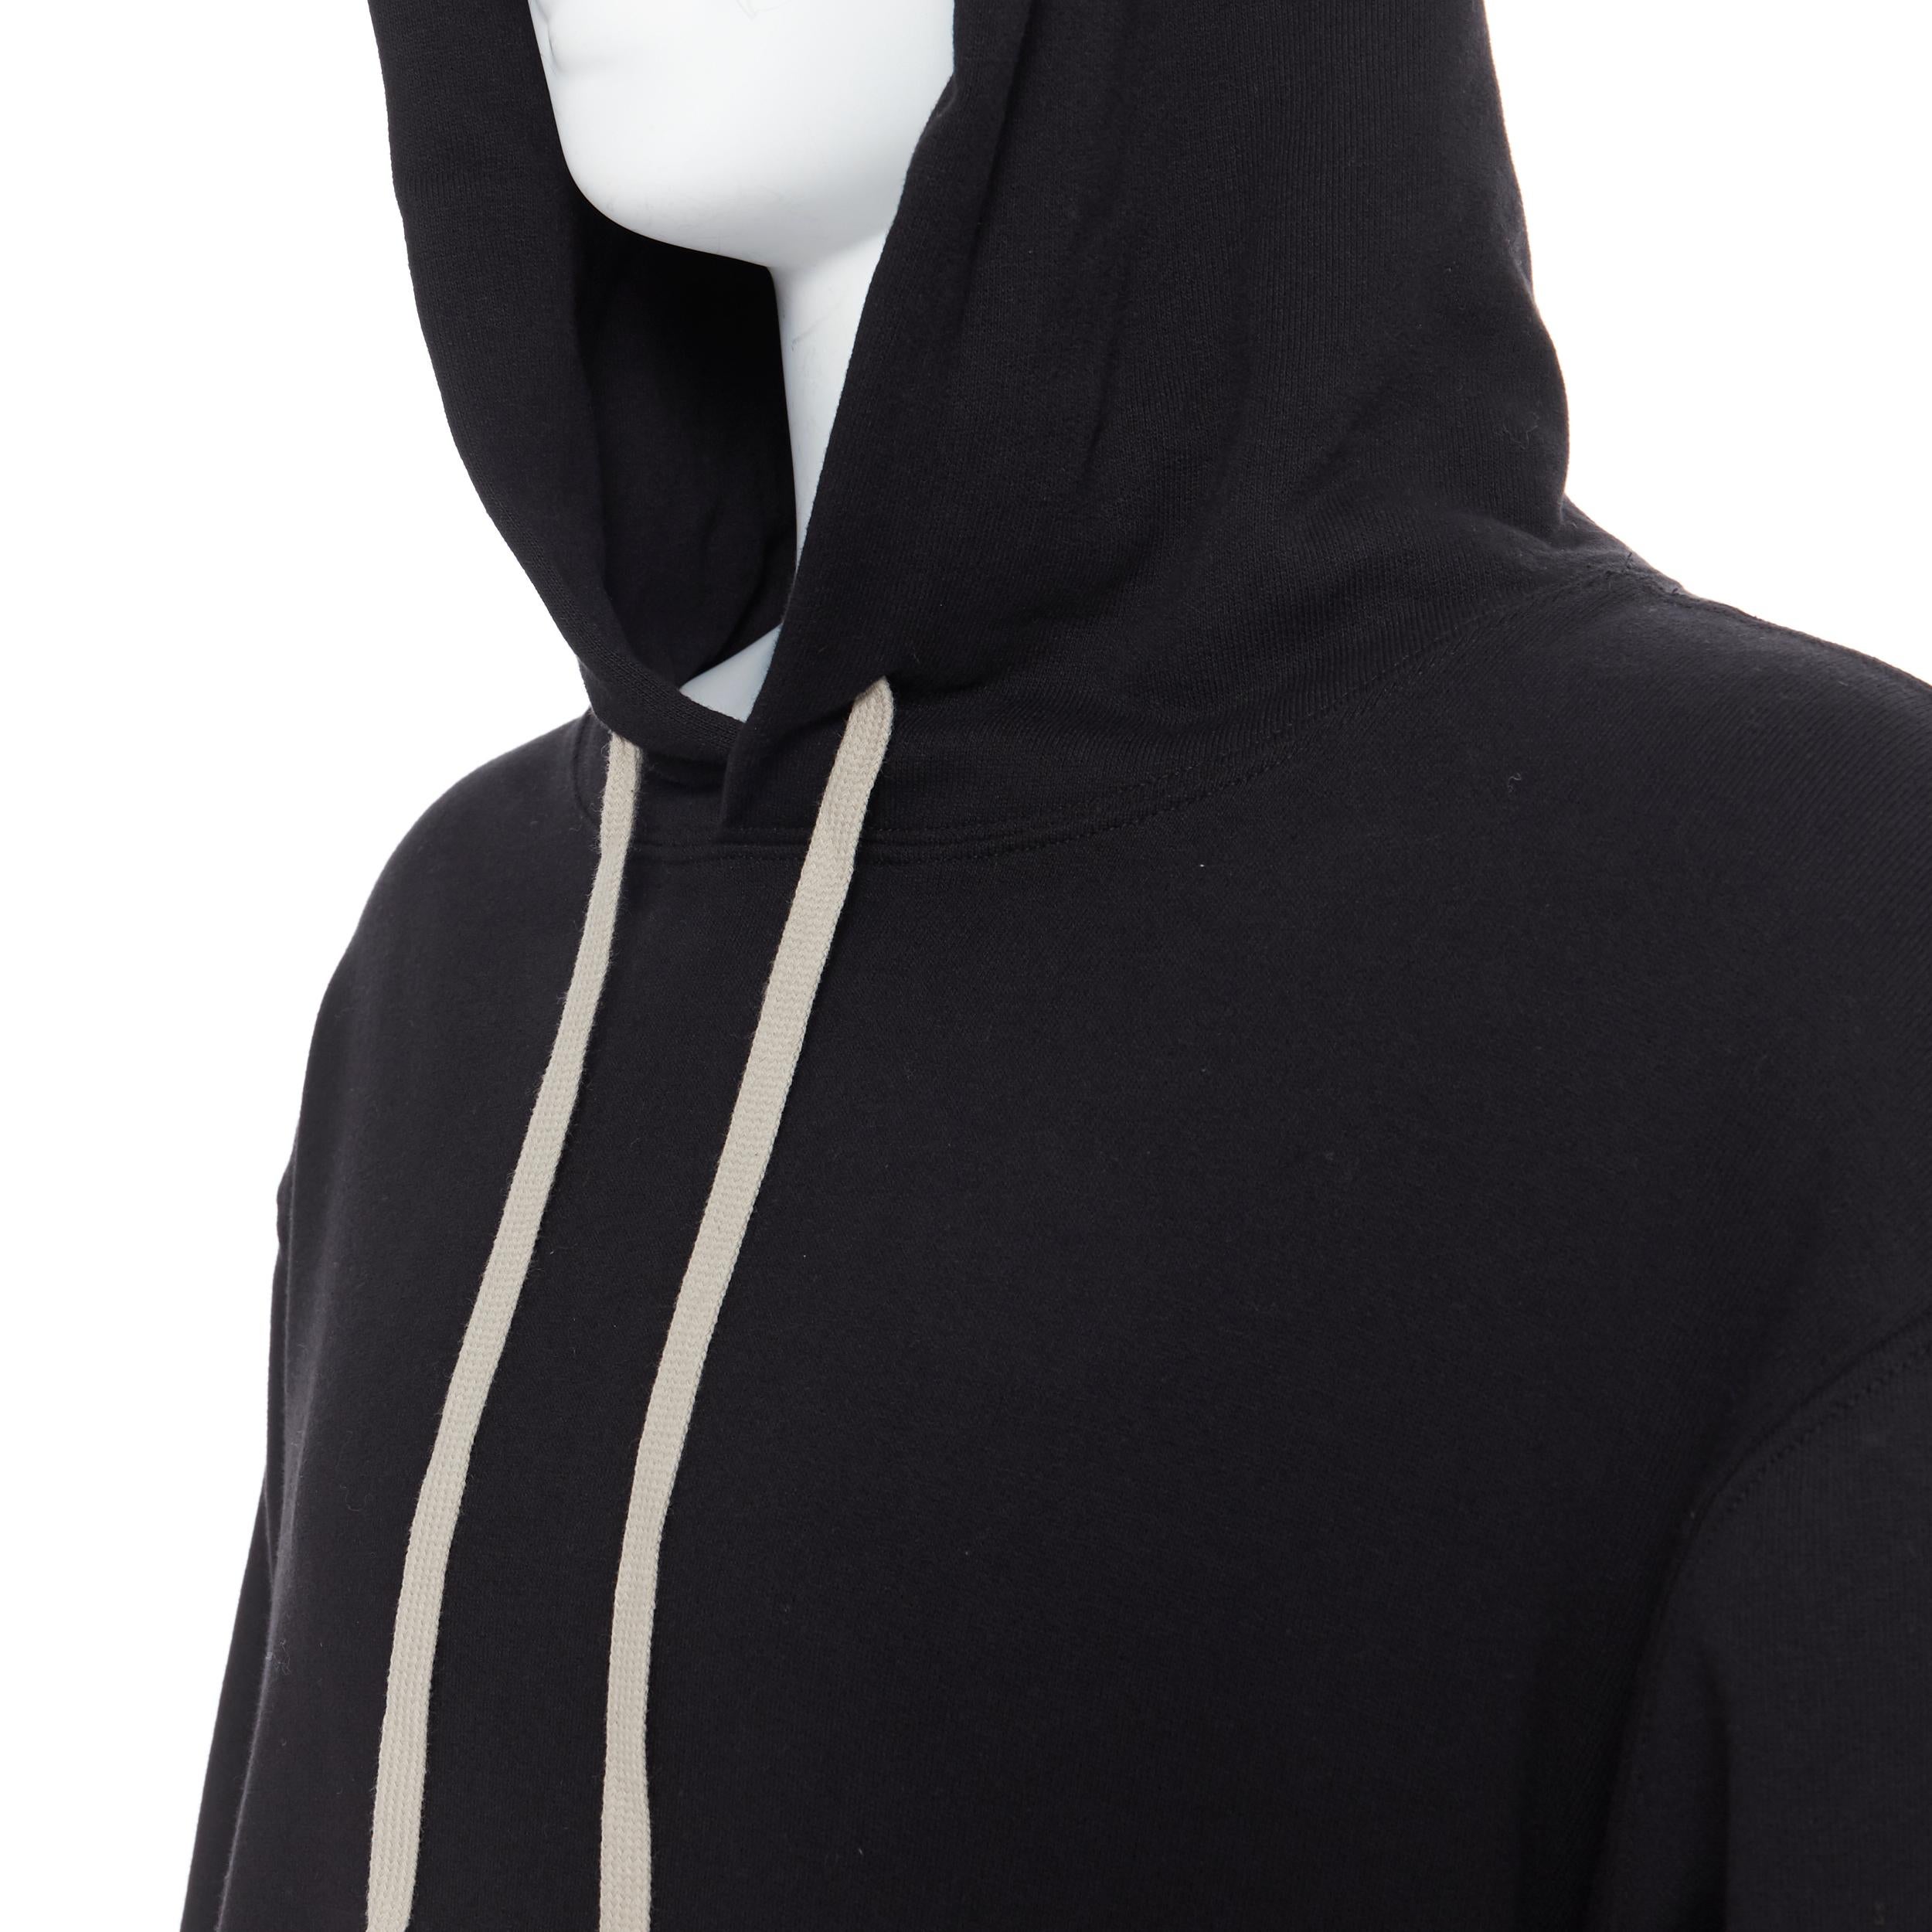 new RICK OWENS CHAMPION SS20 Tecuatl Black Pentagram oversized sweater hoodie S
Brand: Rick Owens
Designer: Champion
Collection: SS2020
Model Name / Style: Pentagram hoodie
Material: Cotton
Color: Black
Pattern: Solid
Extra Detail: Embroidery detail